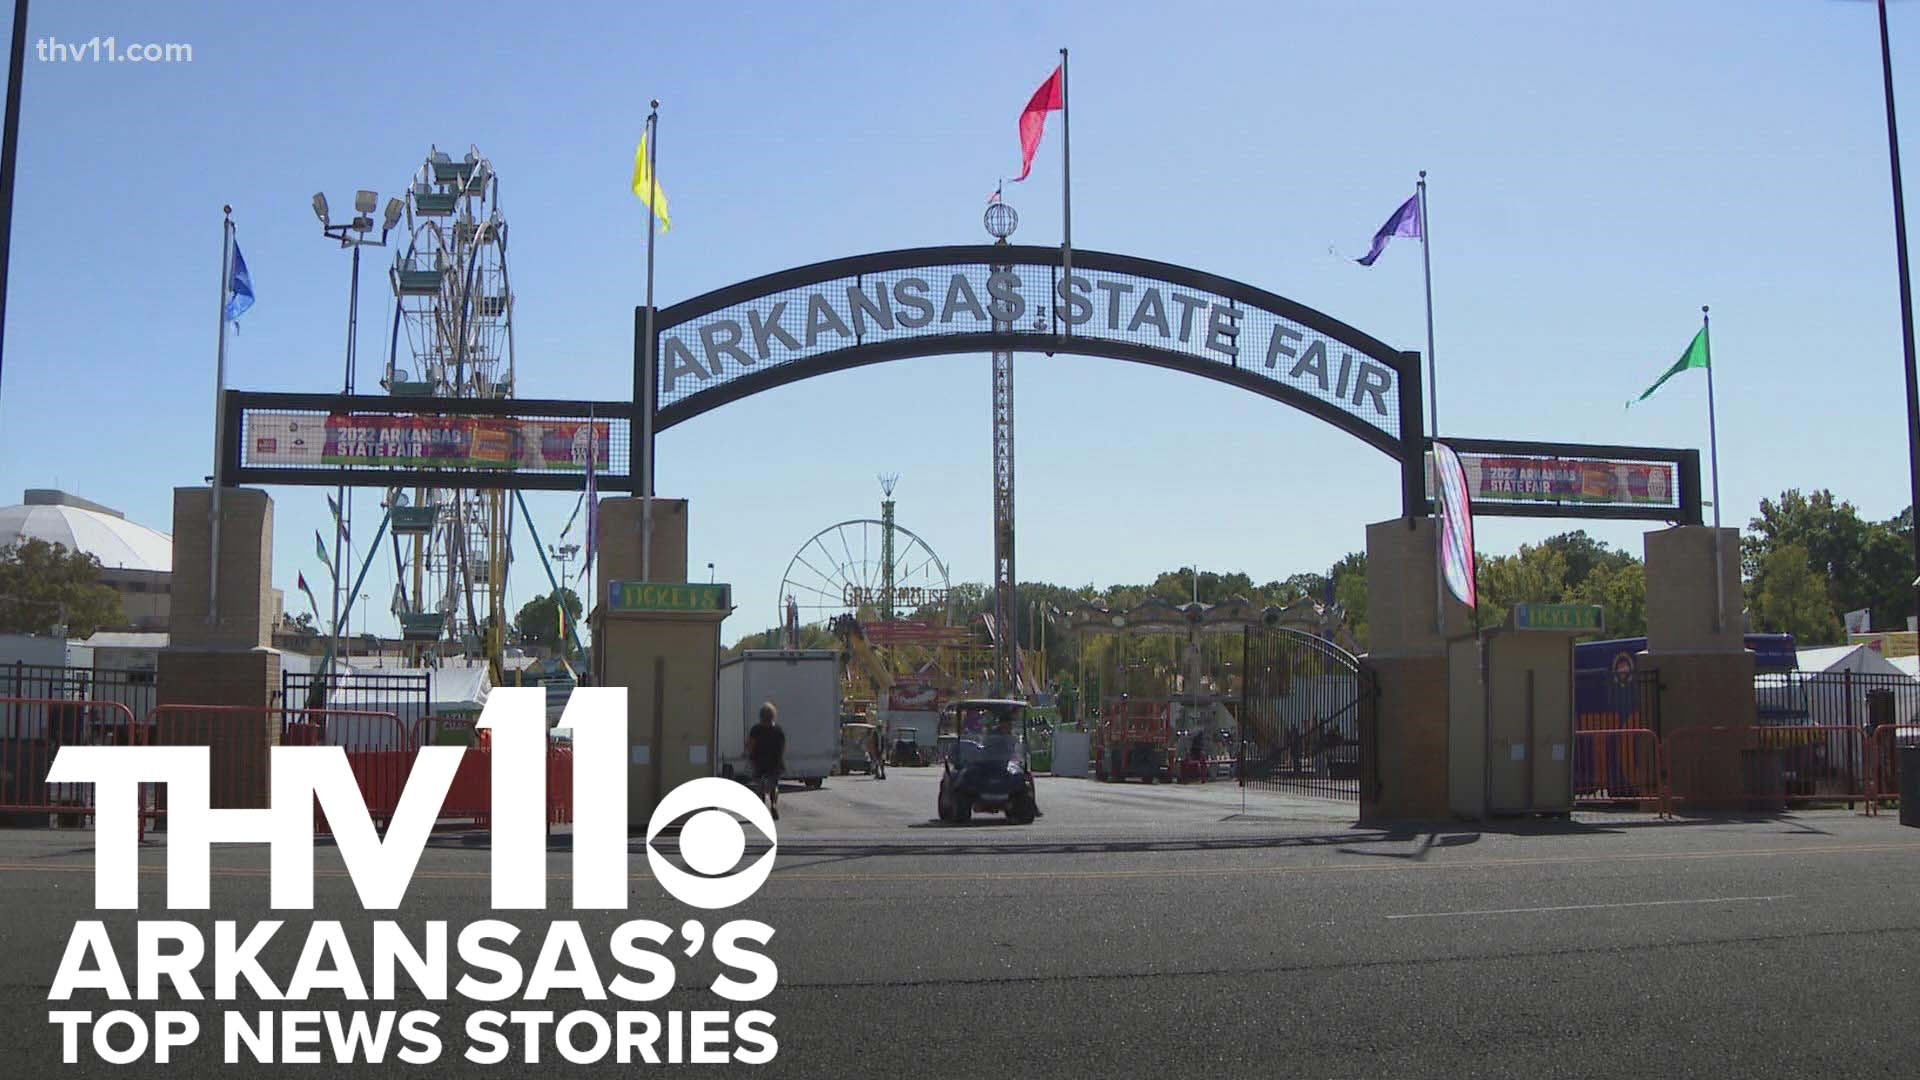 Mackailyn Johnson provides the top news stories for October 14, 2022 including the latest on the Arkansas State Fair.